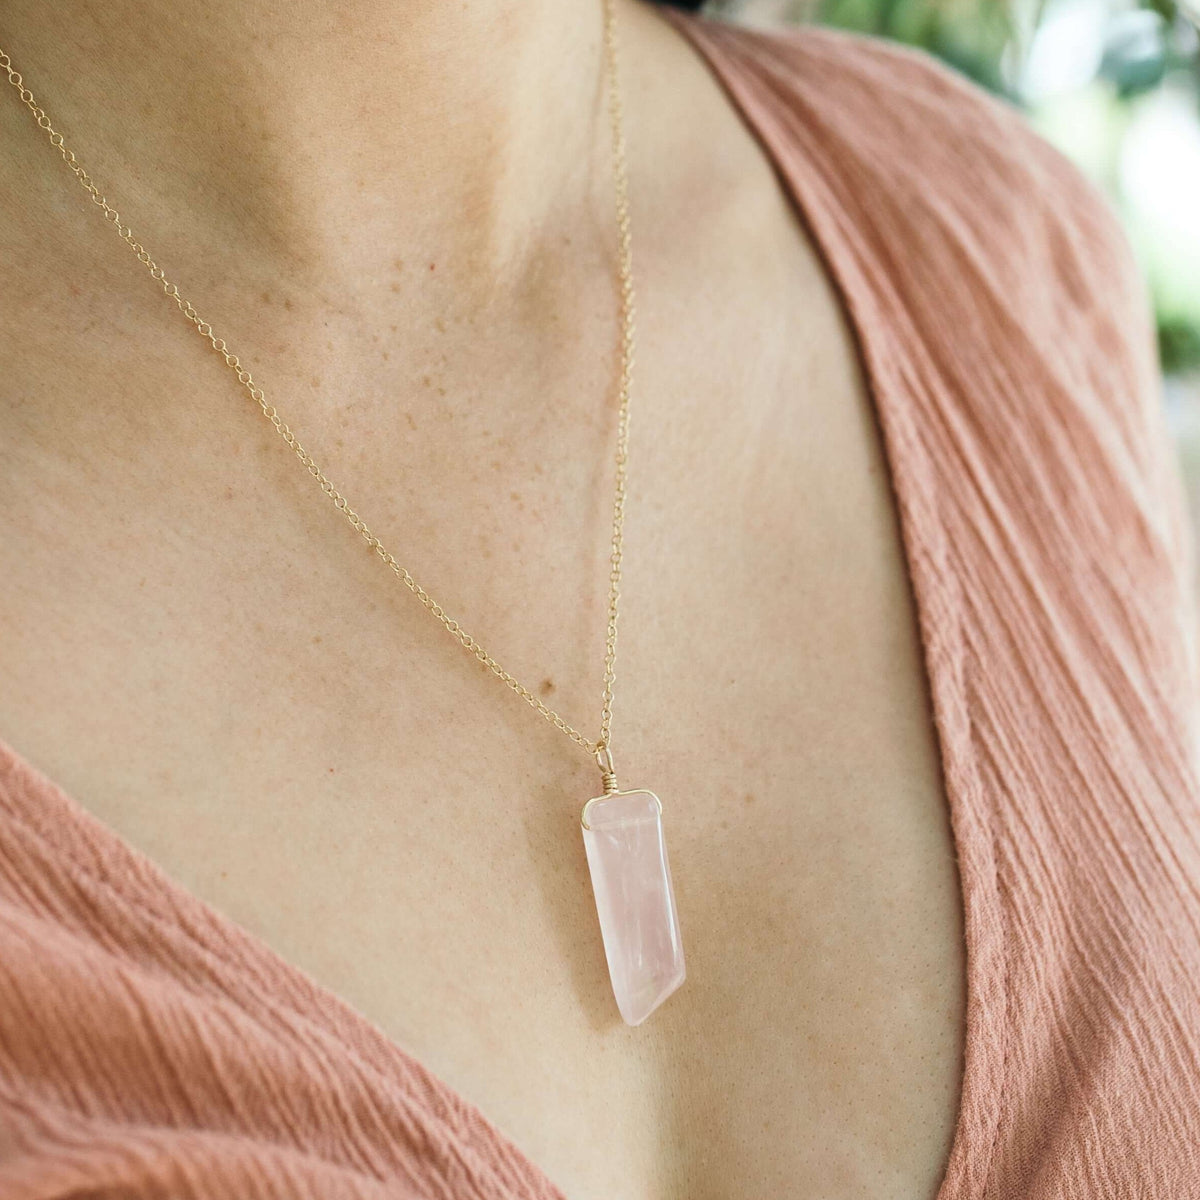 Smooth Point Pendant Necklace - 14K Gold Fill - Luna Tide Handmade Jewellery